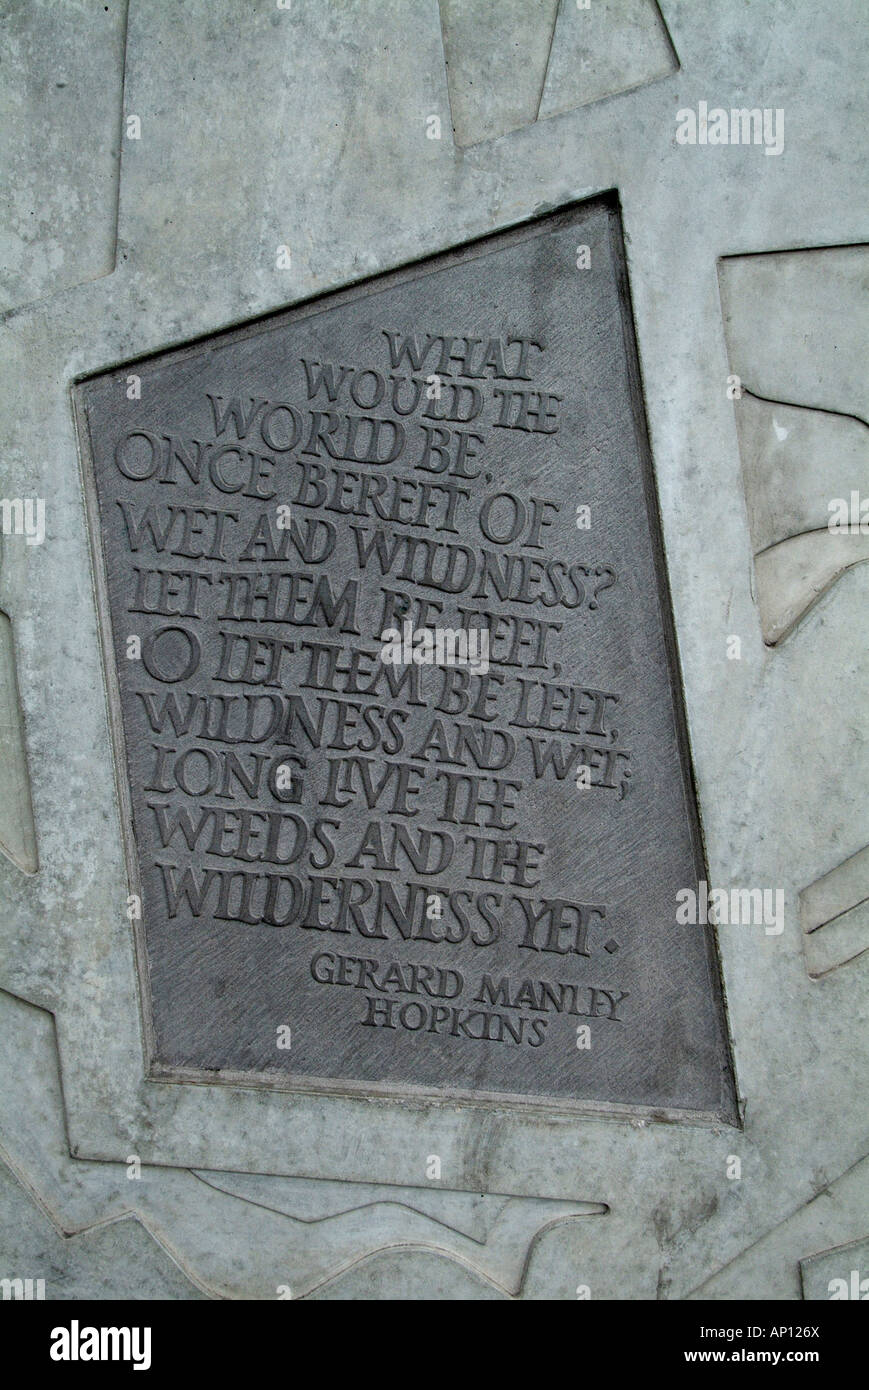 Scottish Parliament exterior wall plaque  What would the world be once bereft of wet and wildness let them be left long live the Stock Photo